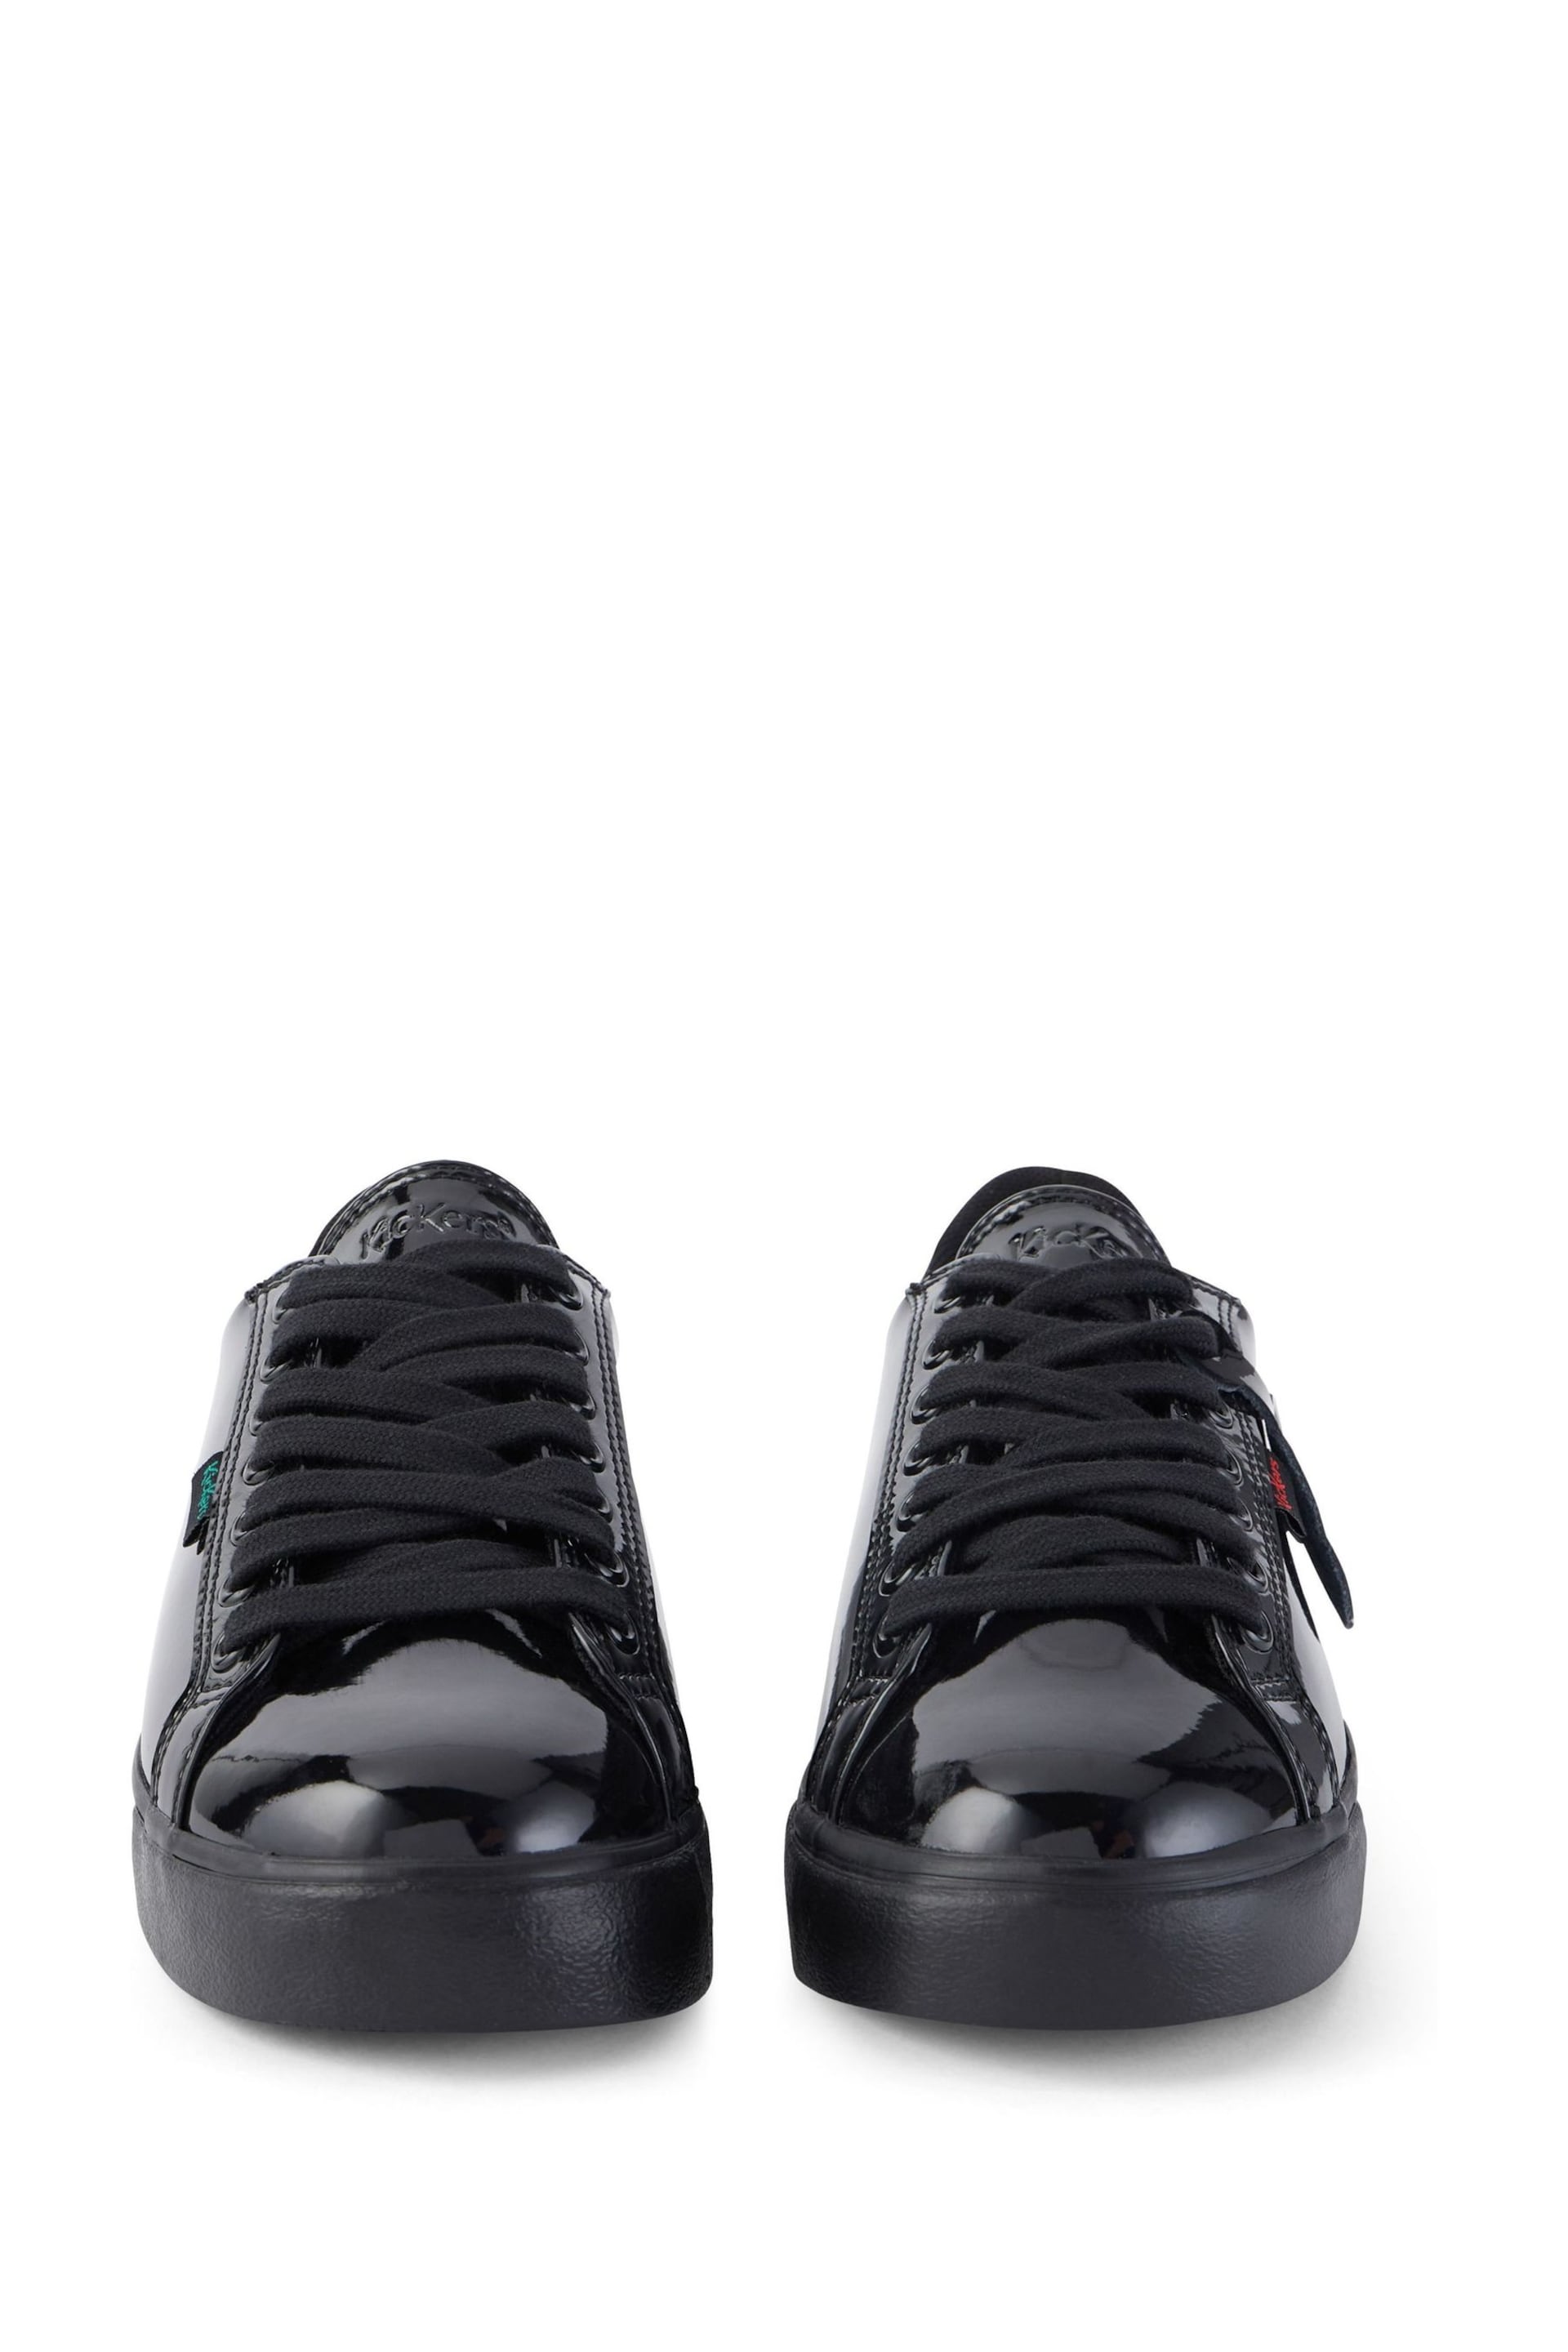 Kickers Black Tovni Lacer Shoes - Image 4 of 8